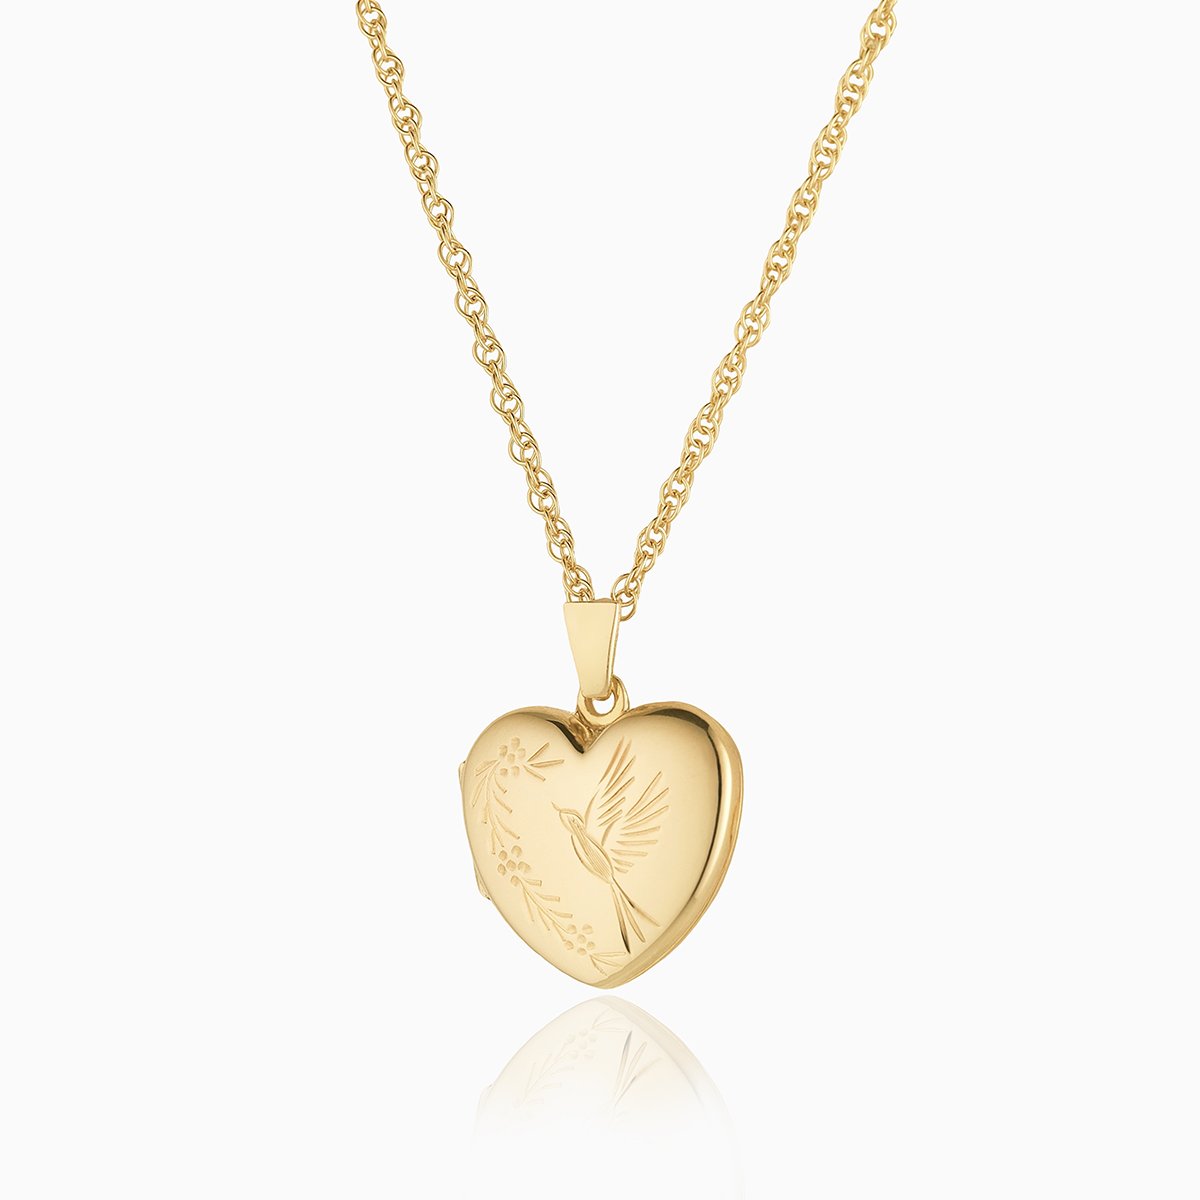 Front shot of a 9 ct gold heart locket with an engraved bird design on a 9 ct gold rope chain